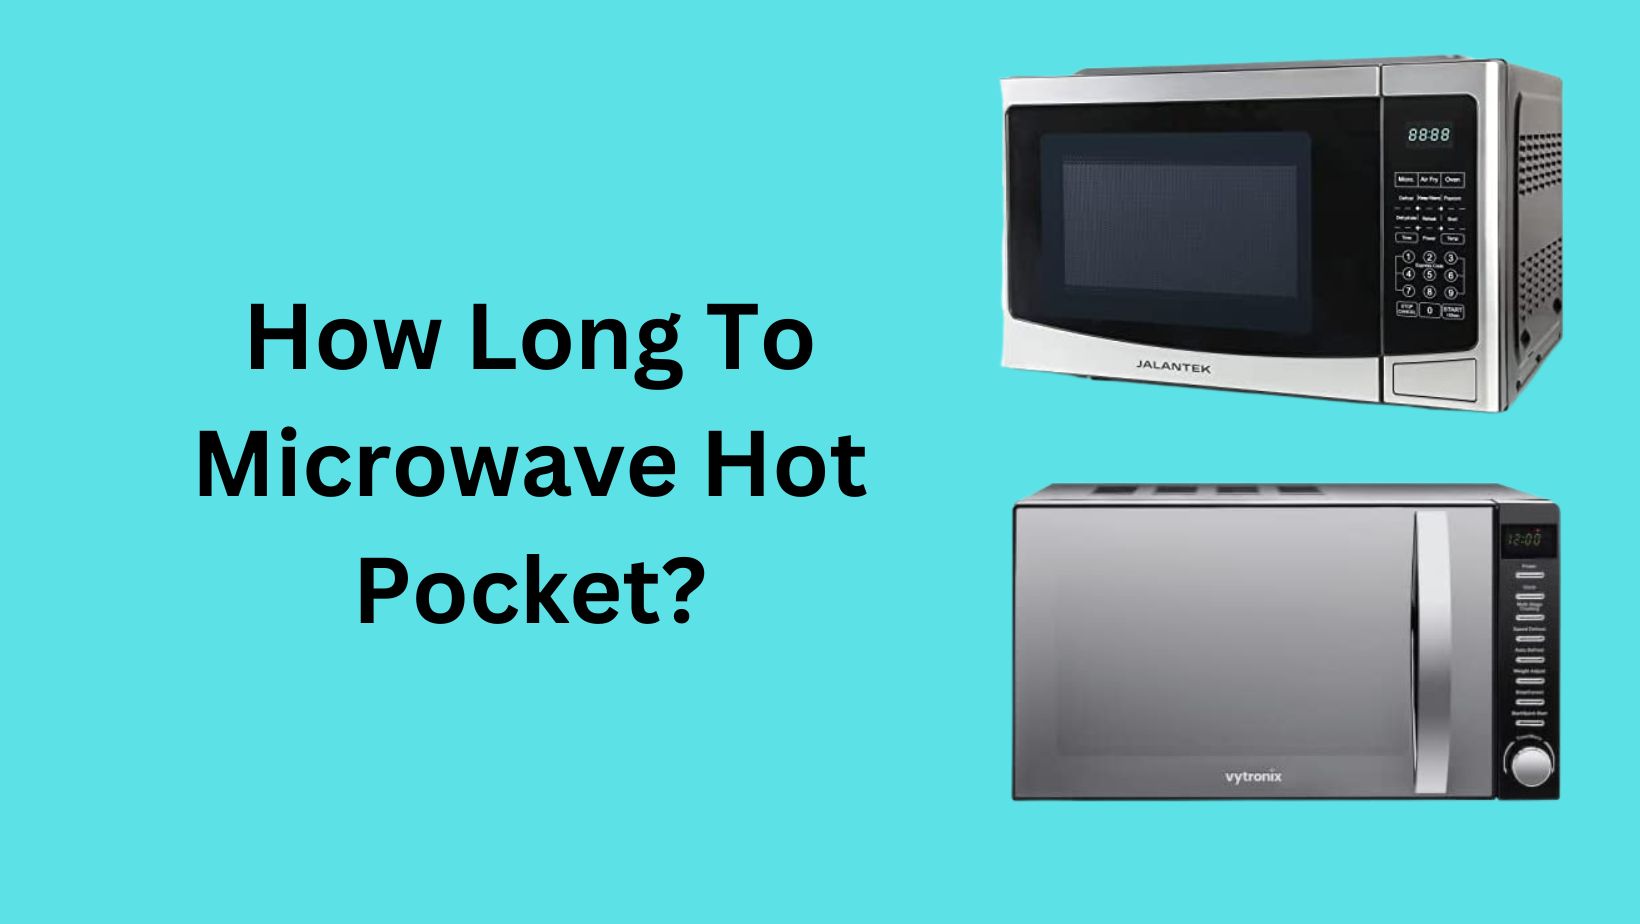 how long to microwave hot pocket